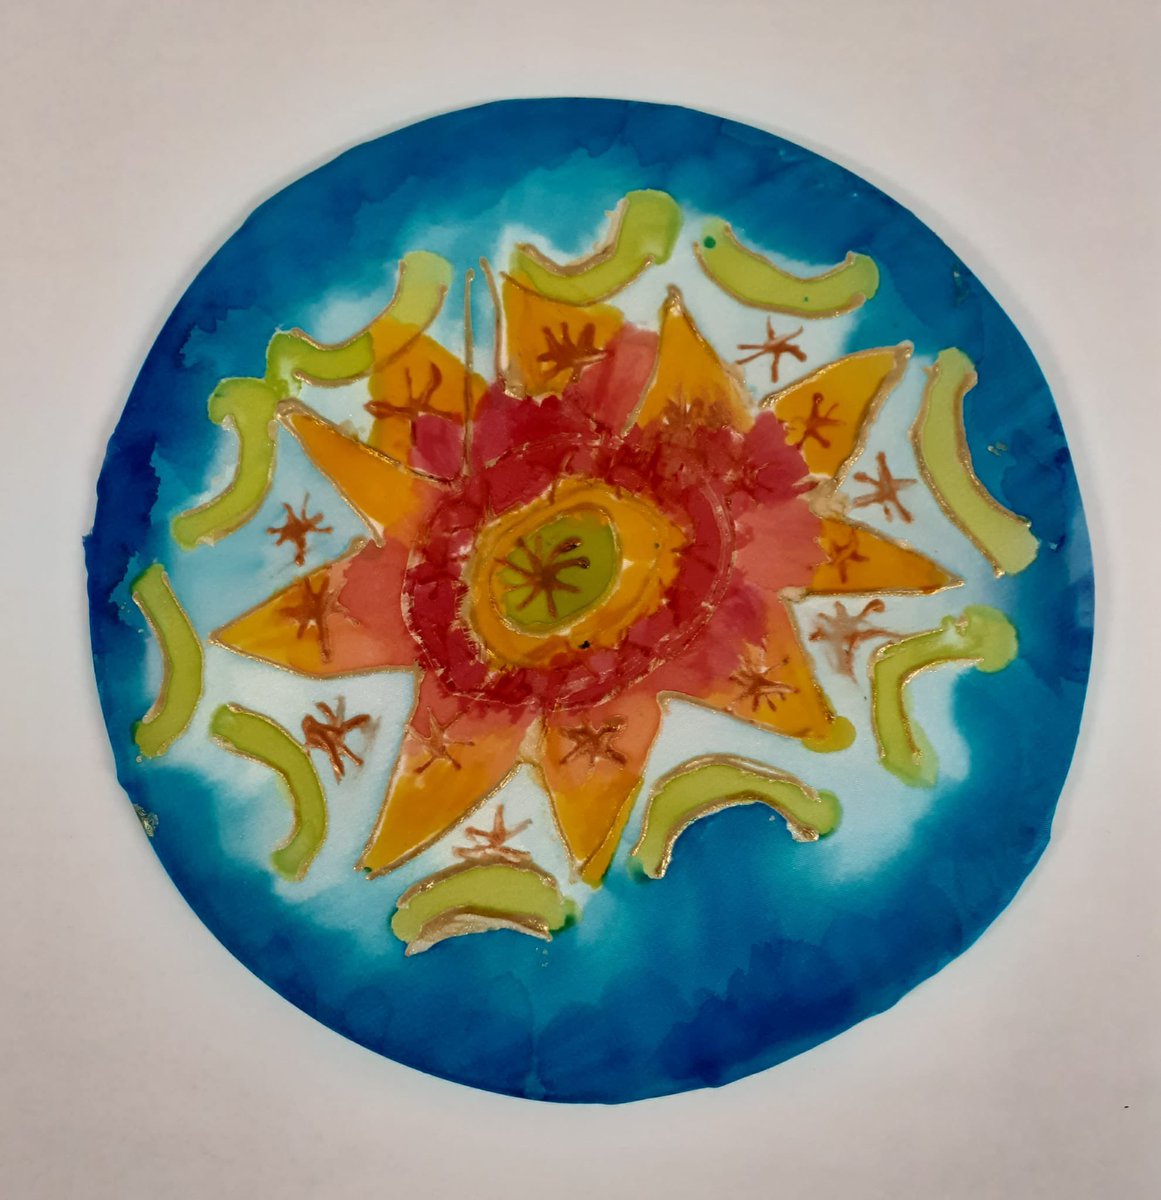 Silk painting from the artist at our Lantern Arts & Crafts course with Spark & support worker Olwyn. So so beautiful🙌 This work is supported by @CorkETB & the materials were bought from the REACH fund